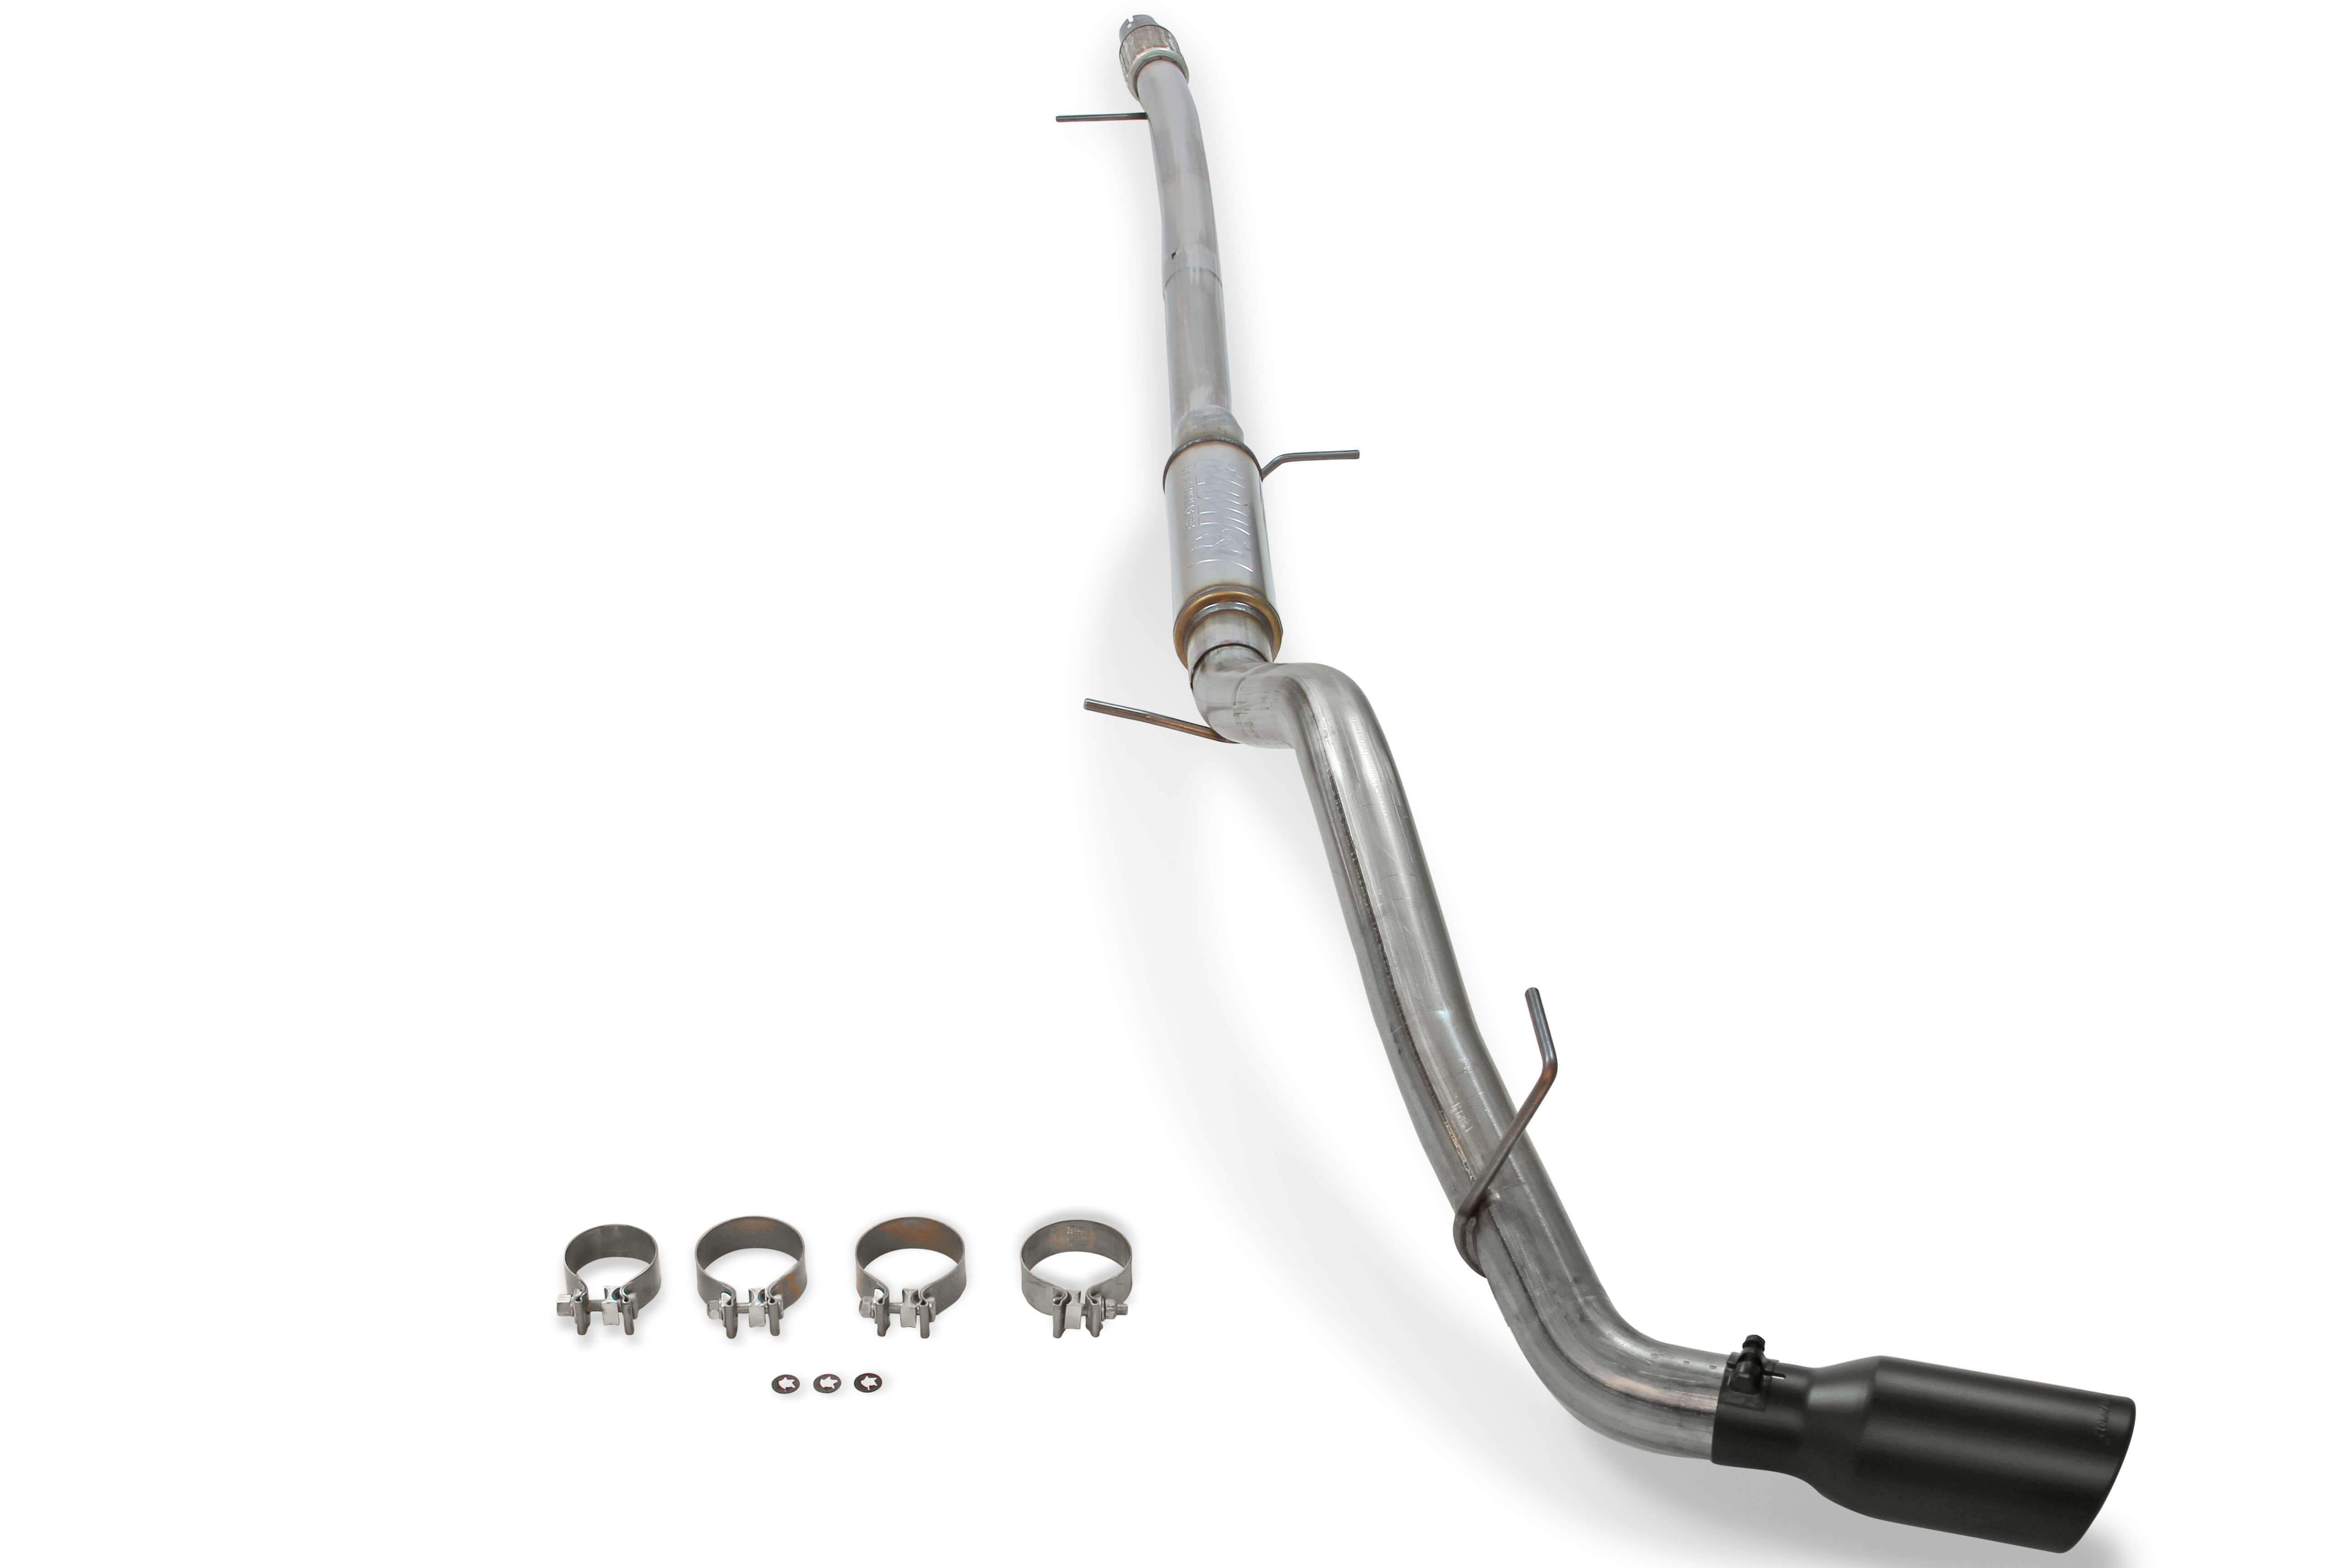 '19-23 Ford Ranger FlowFX Cat Back Exhaust Performance Flowmaster parts